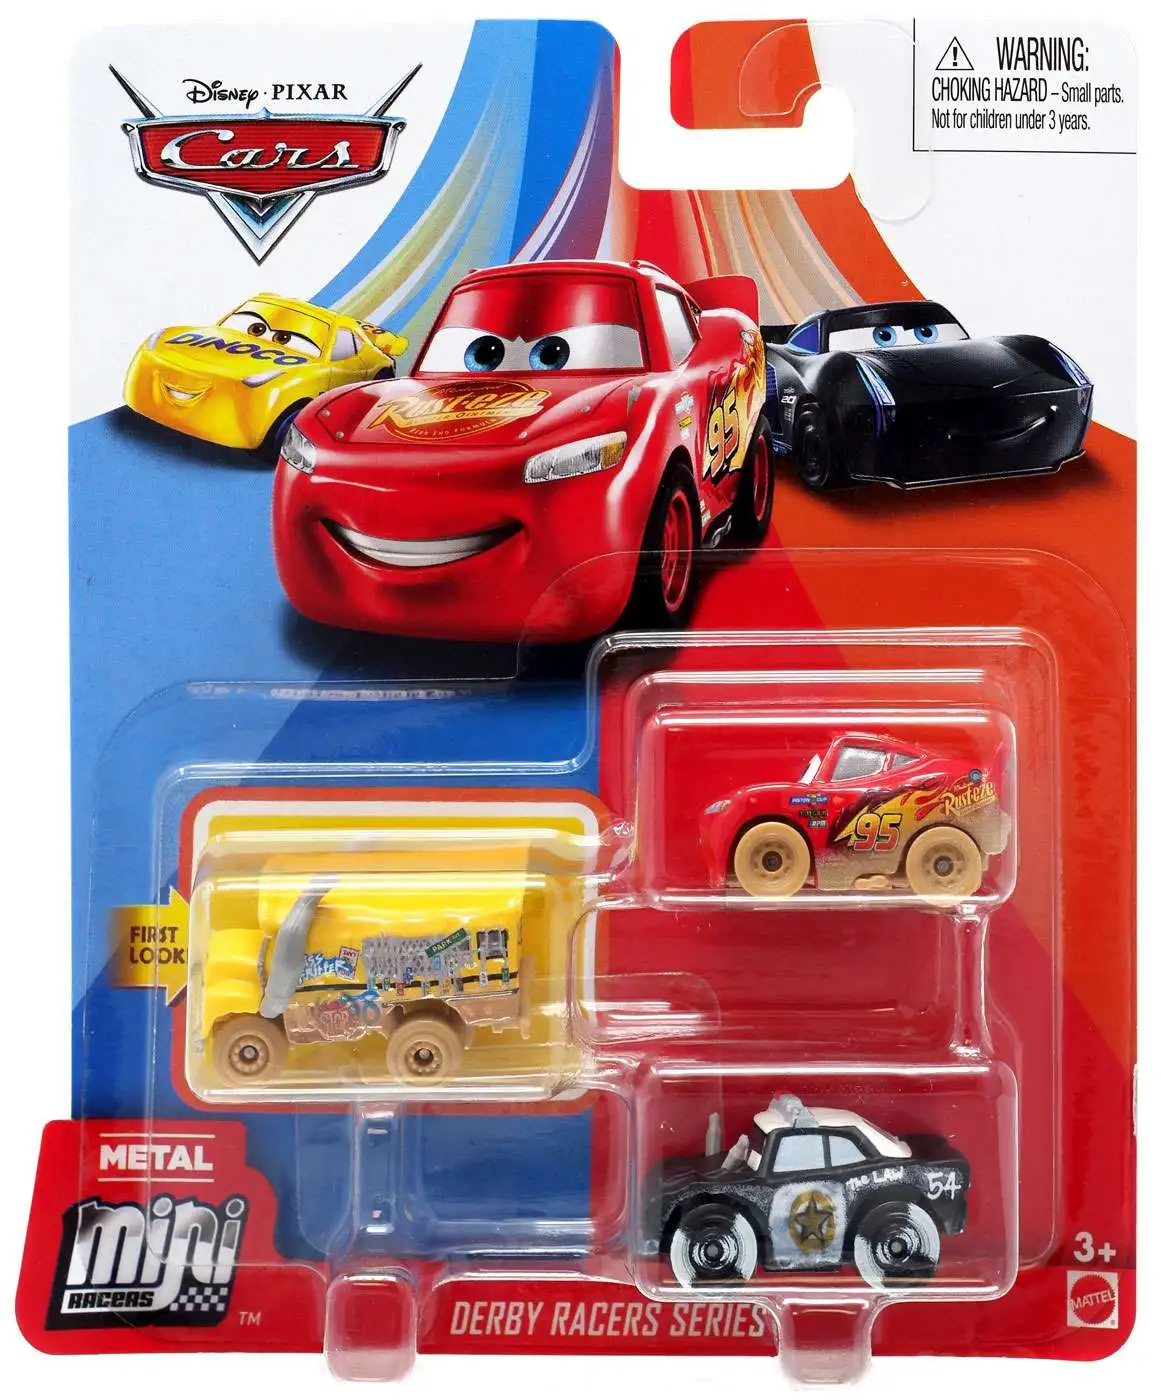 ** 2021 Series 1 in Stock ** Disney Cars Mini Racers Blind/Clear bags 7500+SOLD